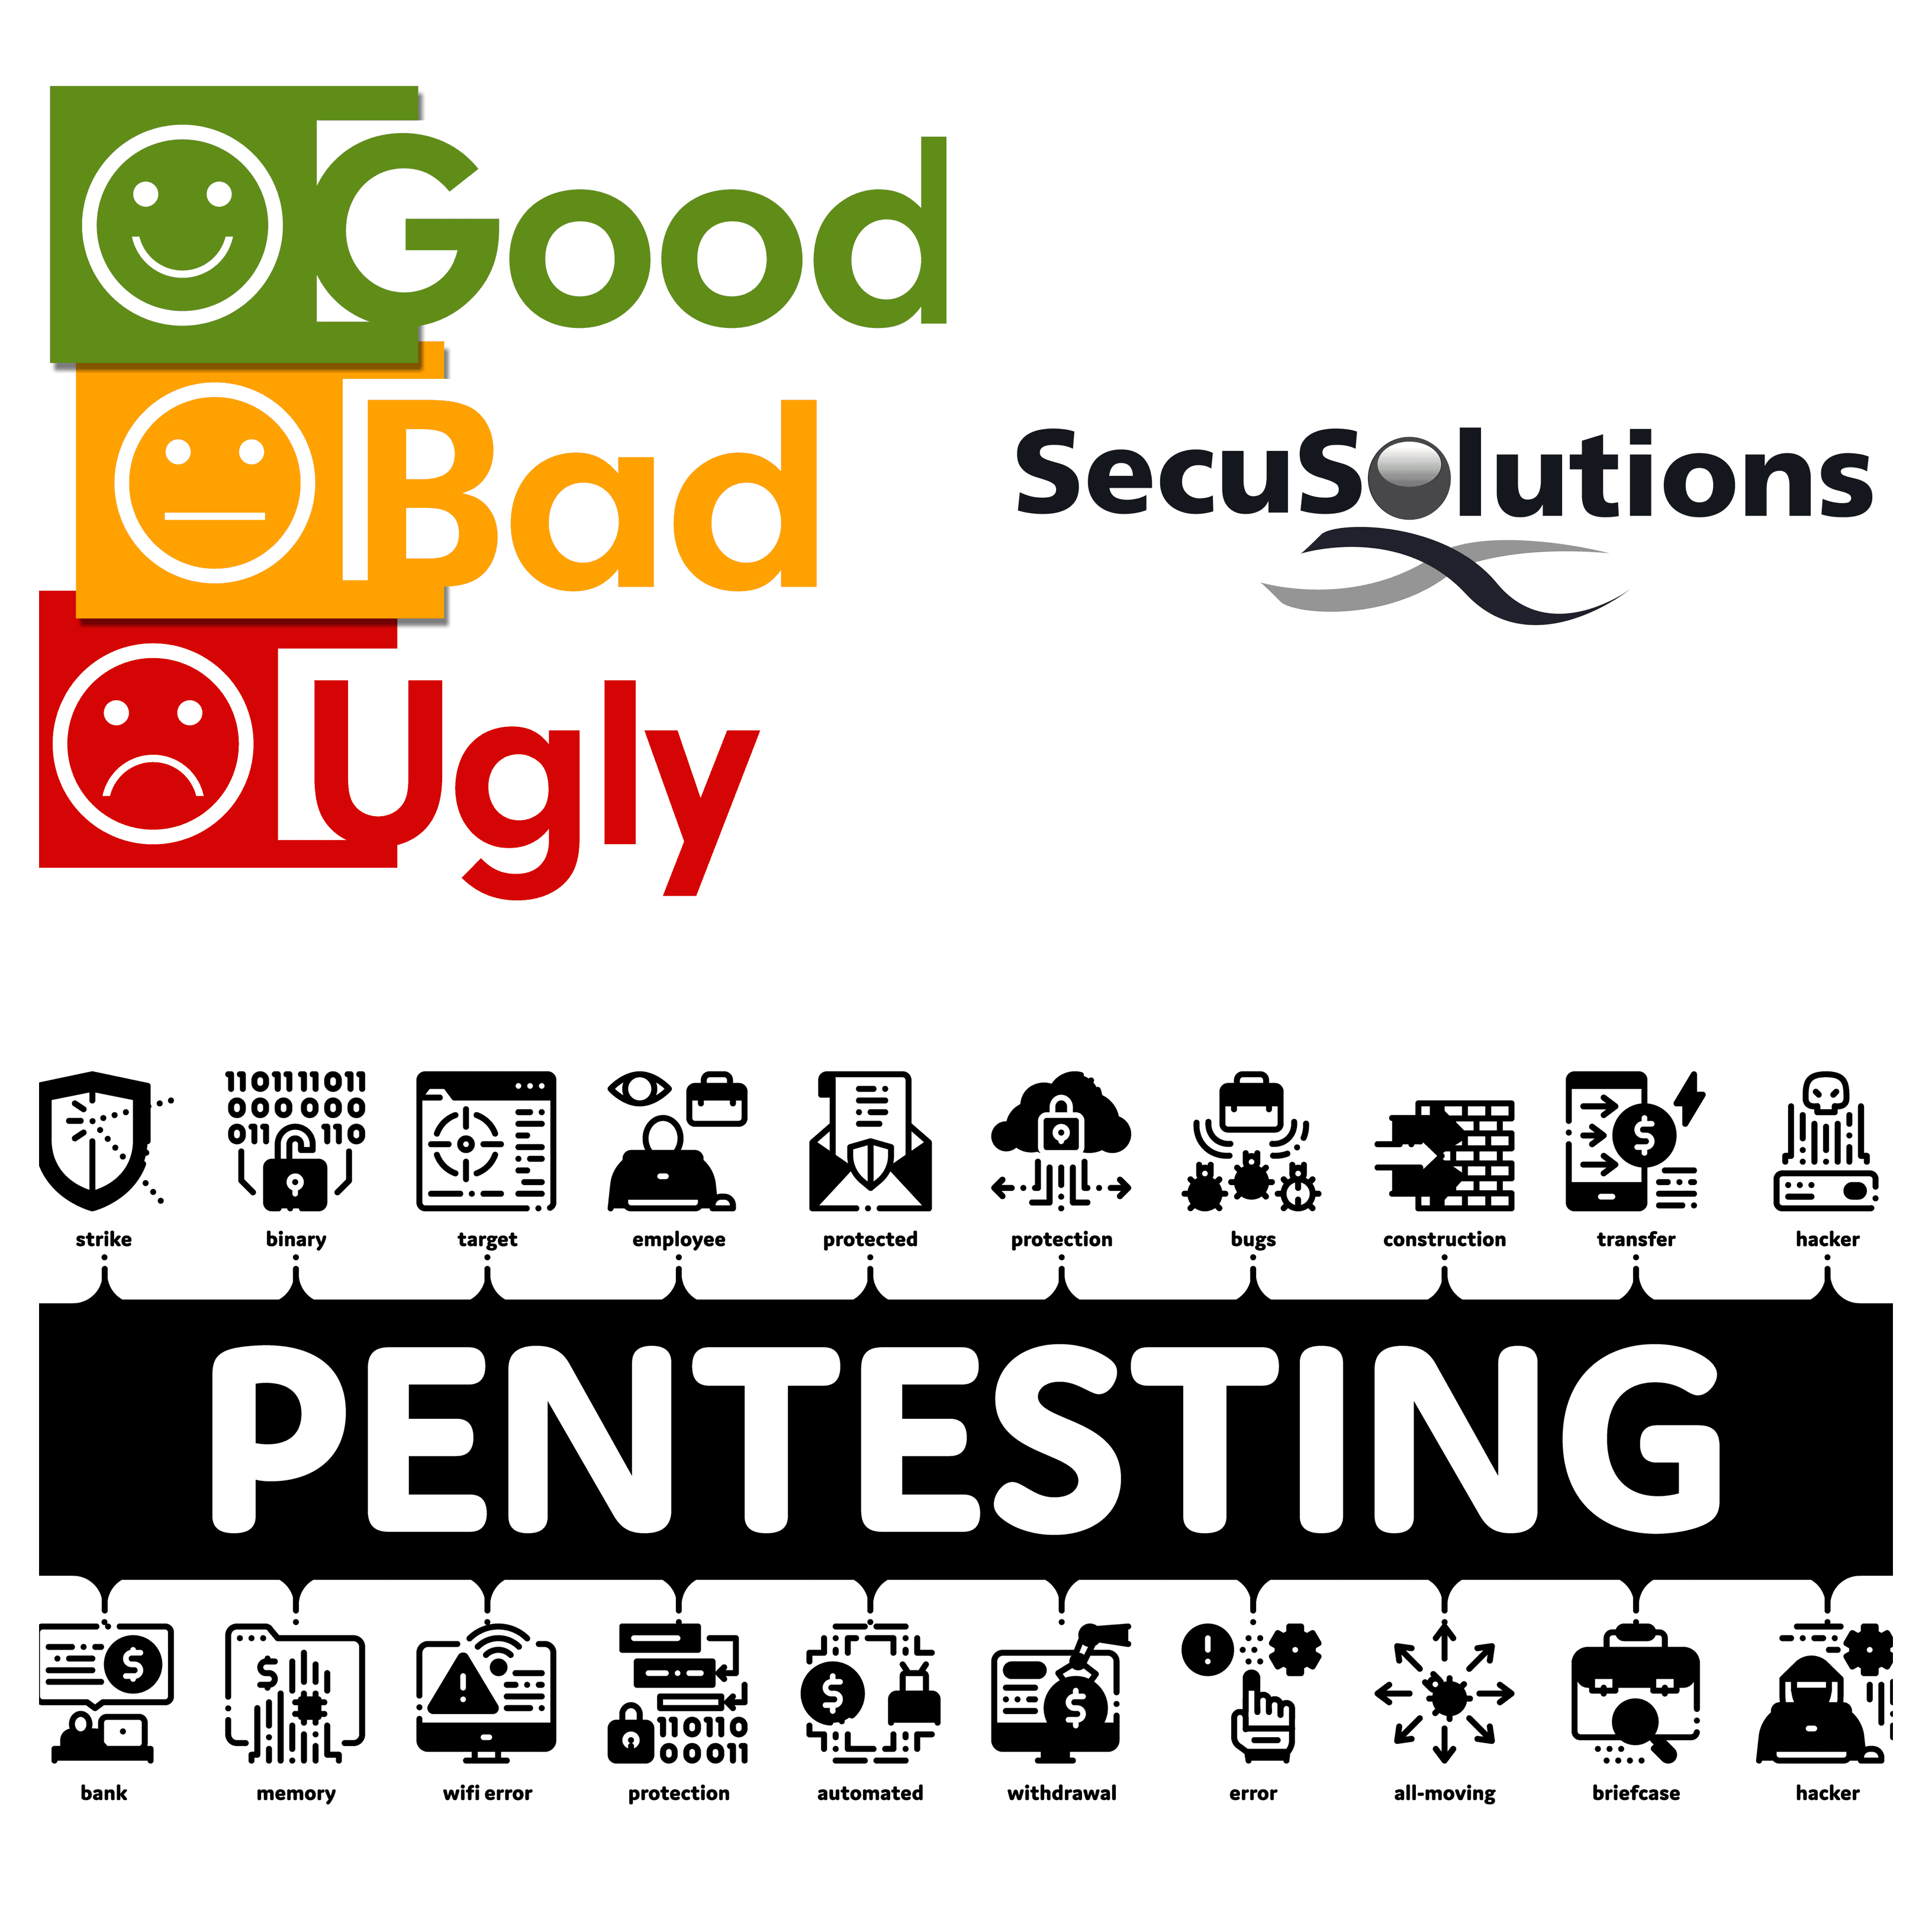 Penetration Testing - The Good The Bad and The Ugly